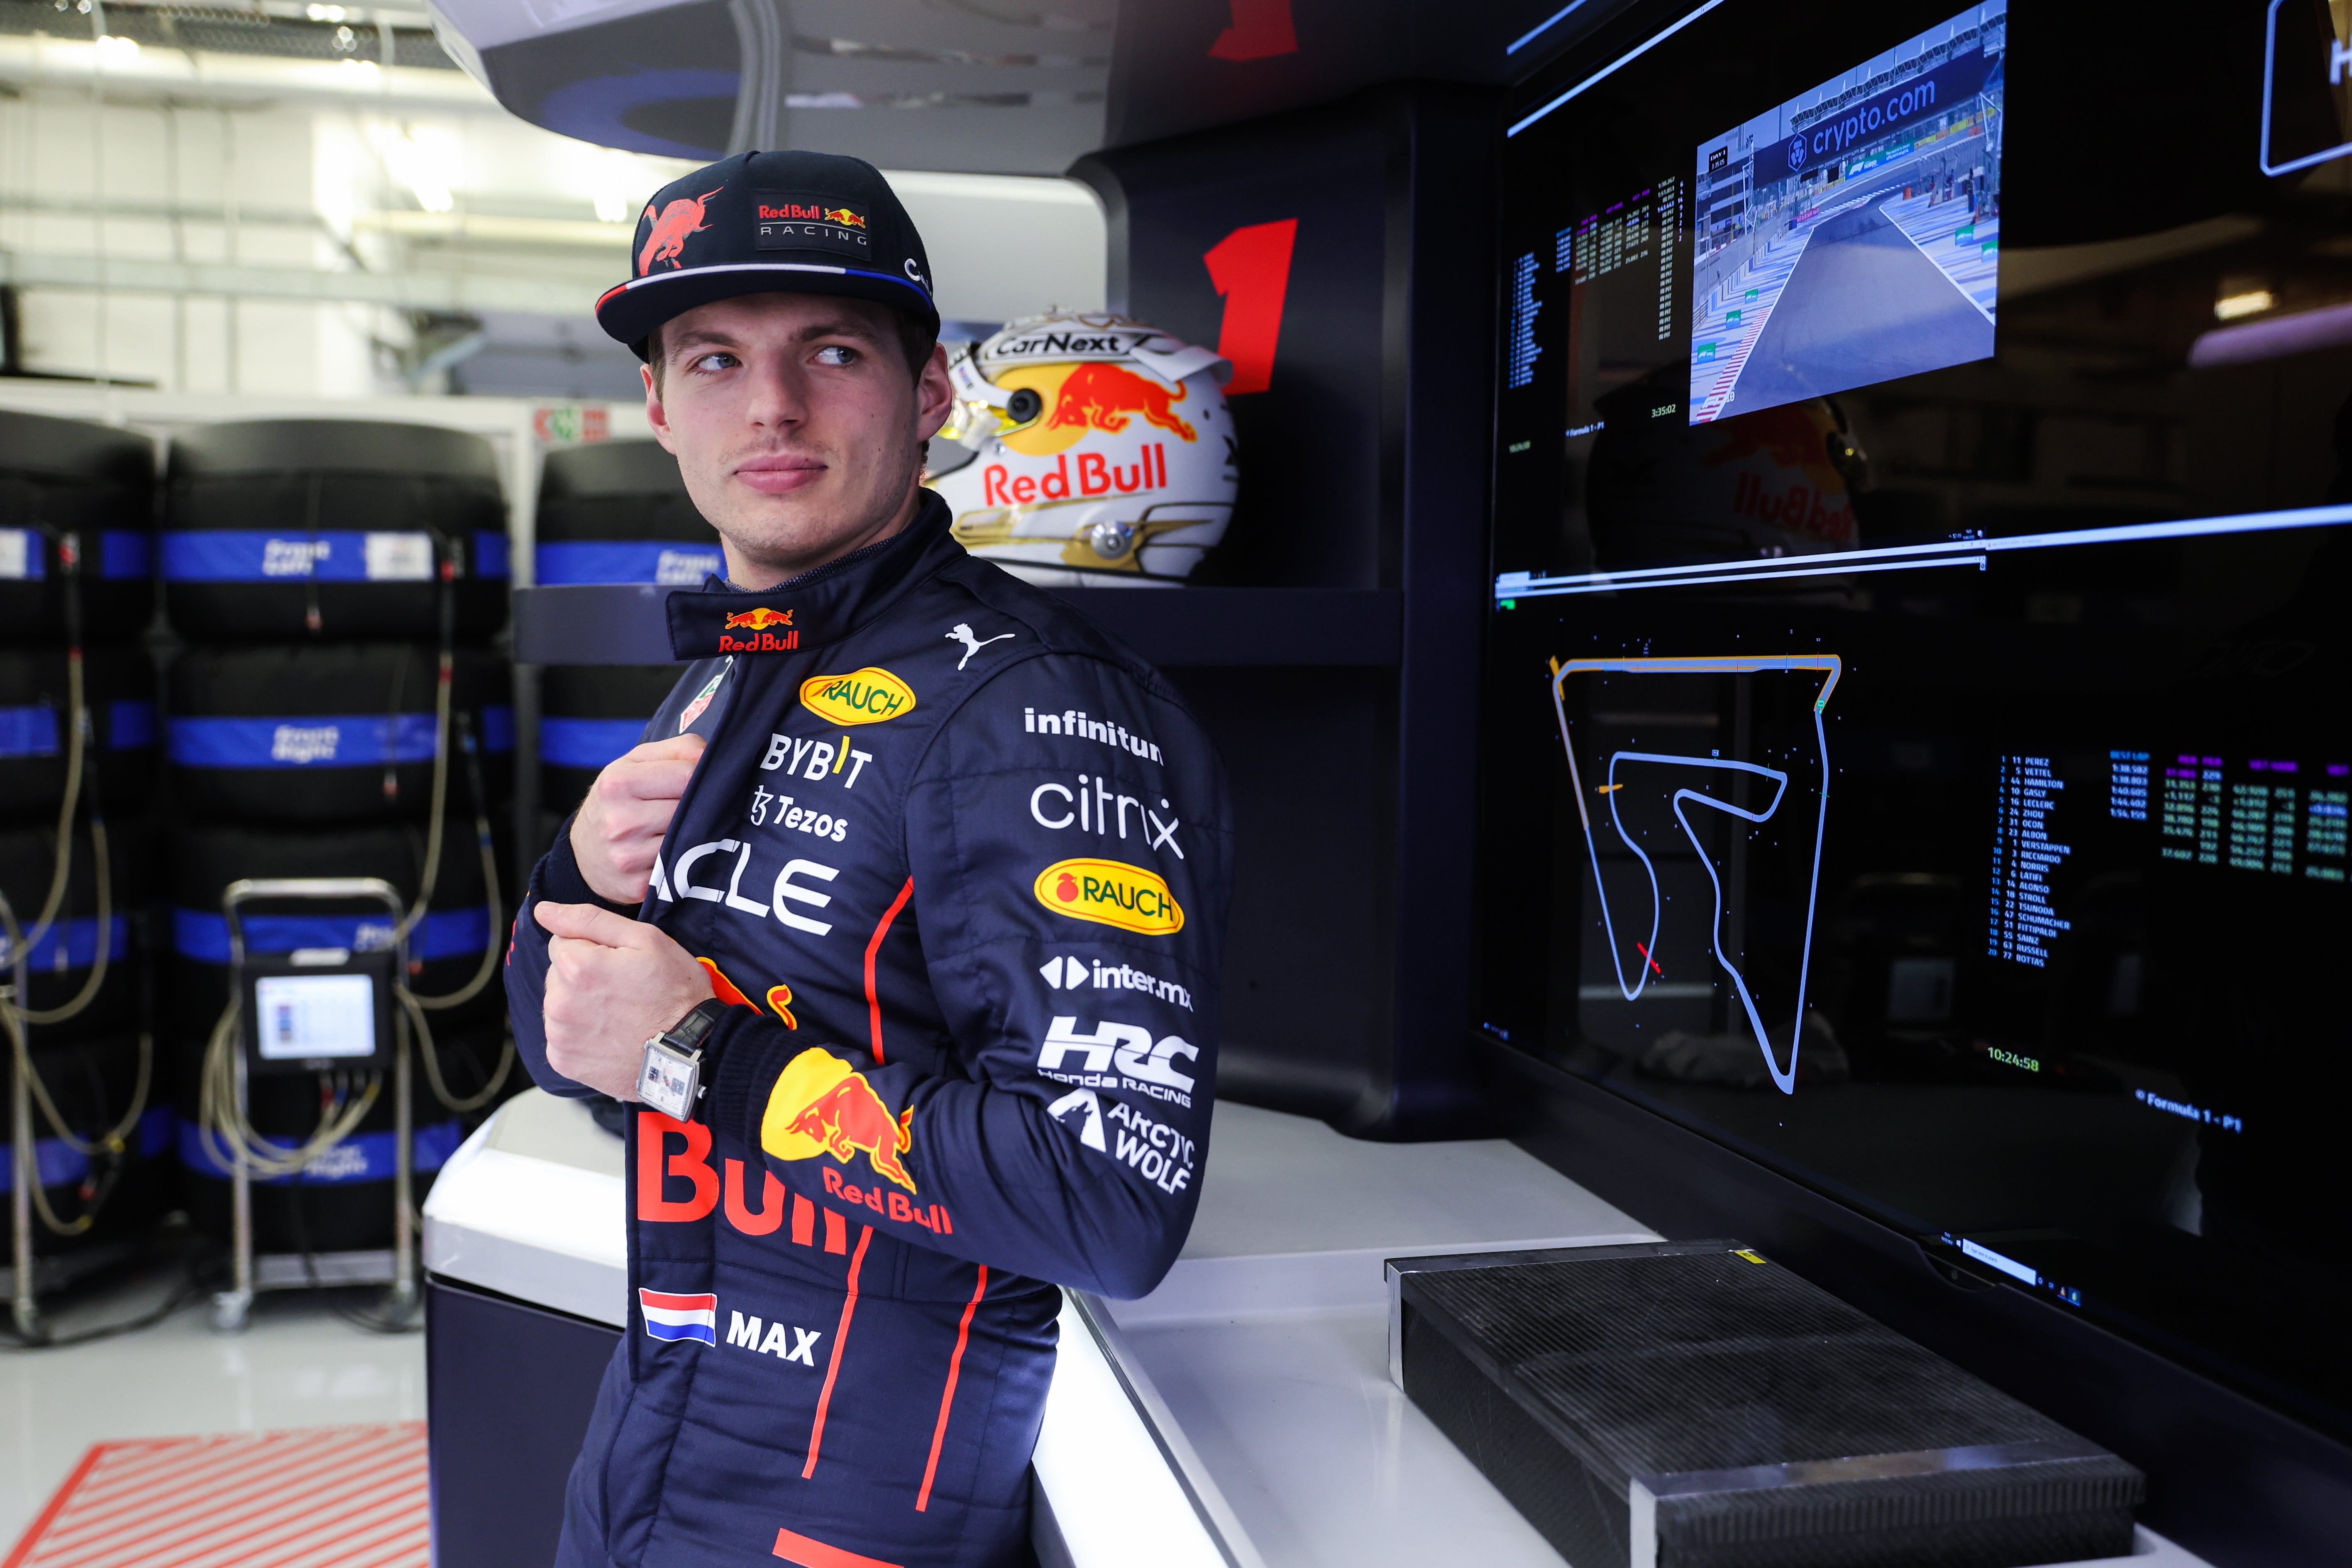 Max Verstappen has publicly criticised the show